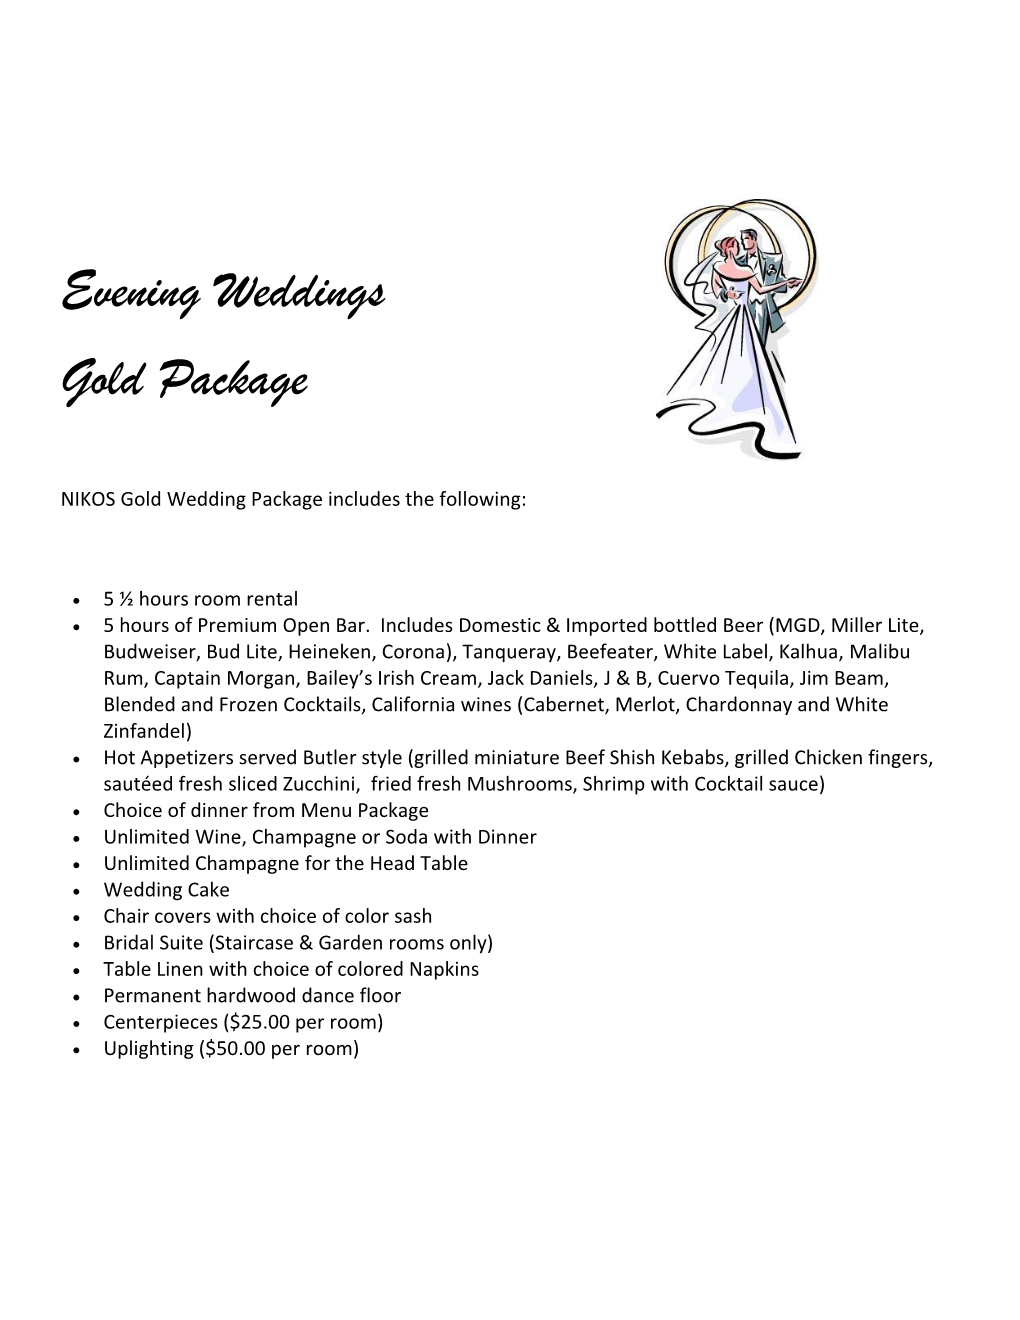 Evening Weddings Gold Package